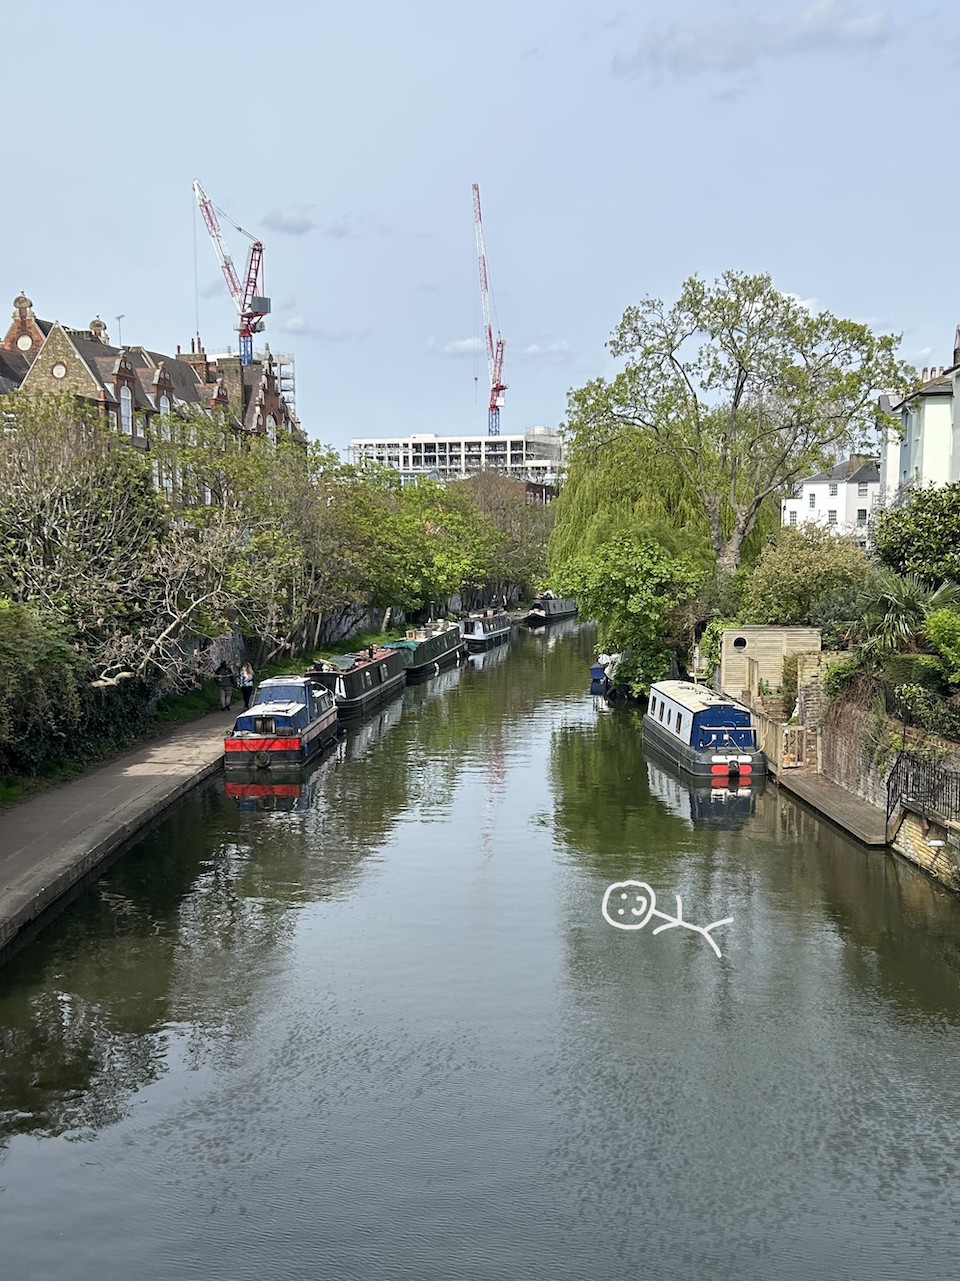 View from above of Regent's Canal, with a stick figure floating in the water